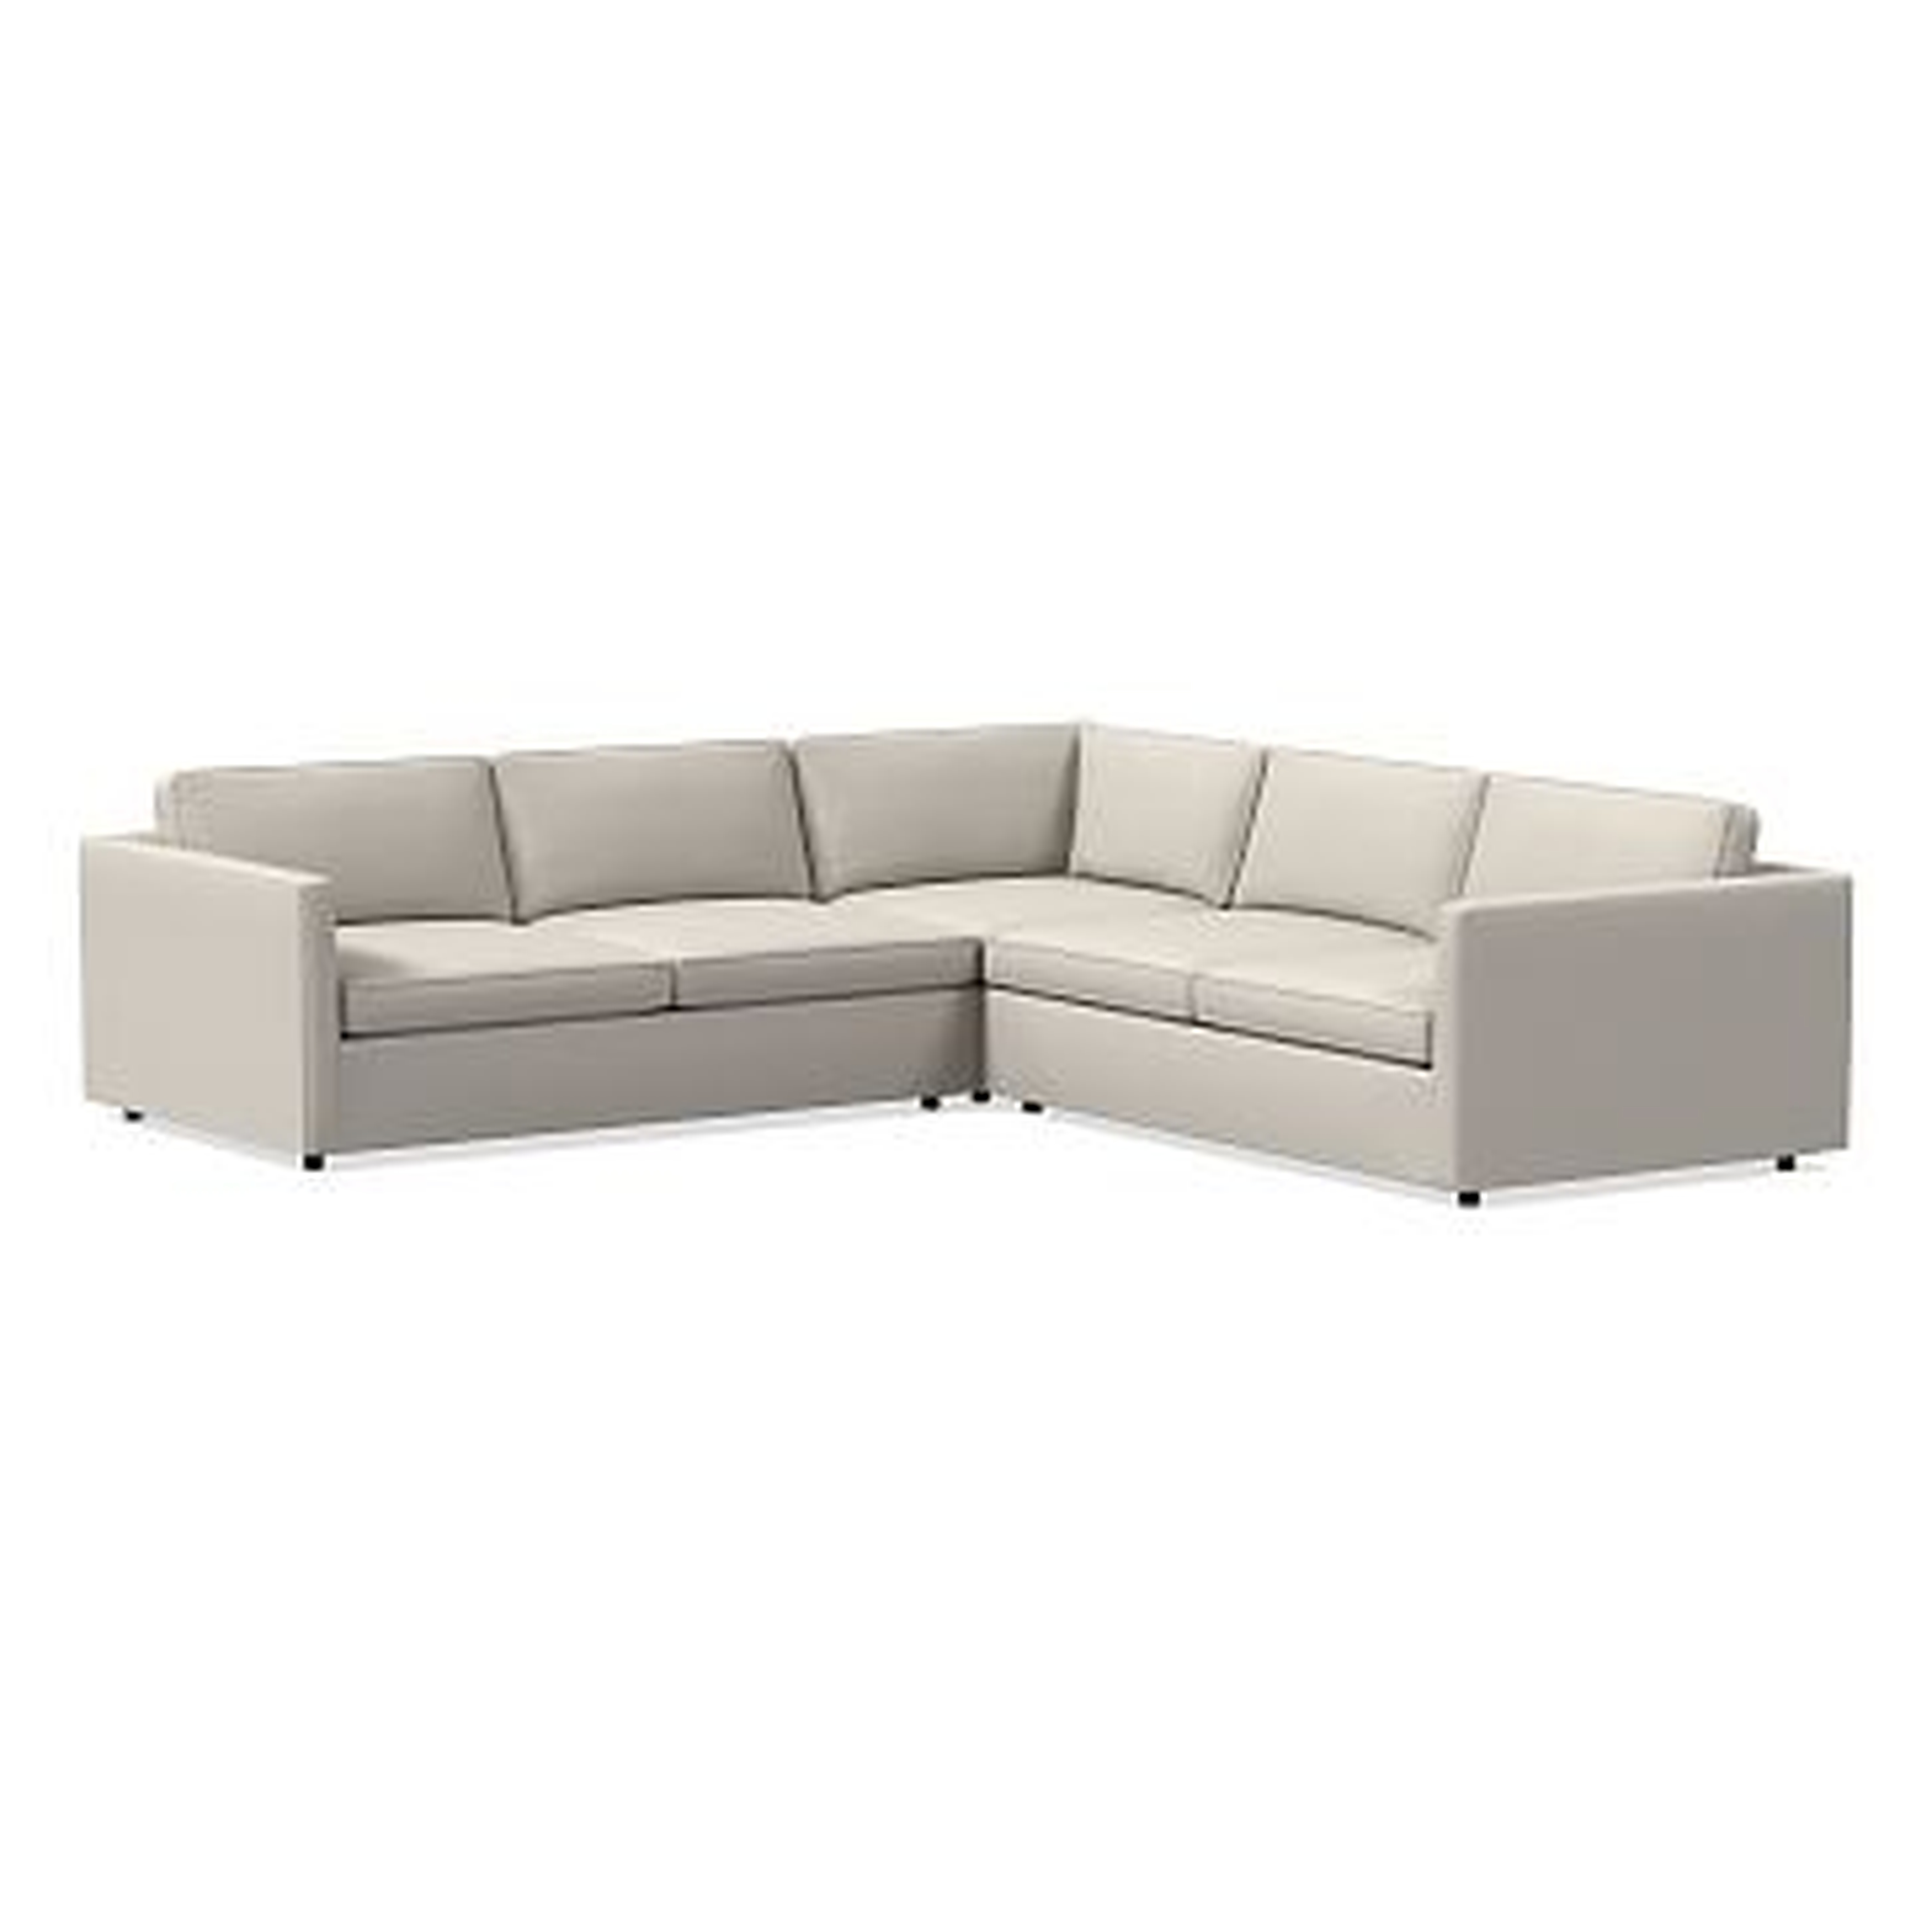 Harris Sectional Set 29: XL LA 75" Sofa, XL Corner, XL RA 75" Sofa, Poly, Yarn Dyed Linen Weave, Alabaster, Concealed Supports - West Elm